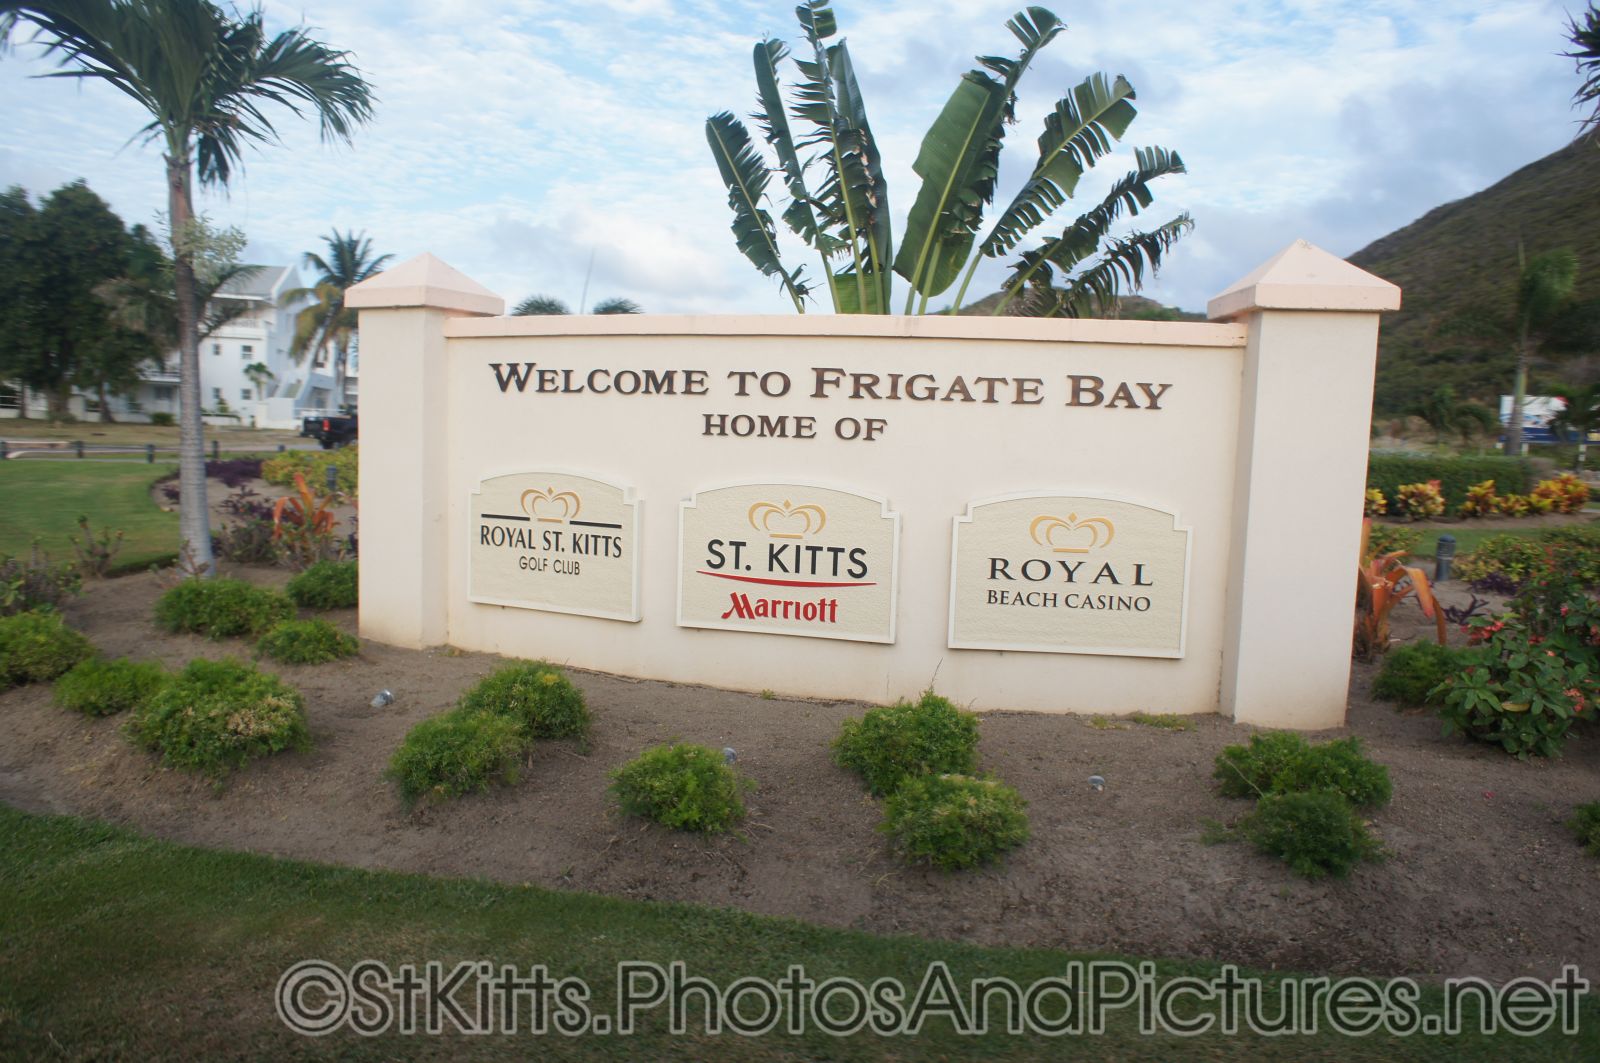 Welcome to Frigate Bay home of Royal St Kitts St Kitts Marriott and Royal Beach Casino sign.jpg
